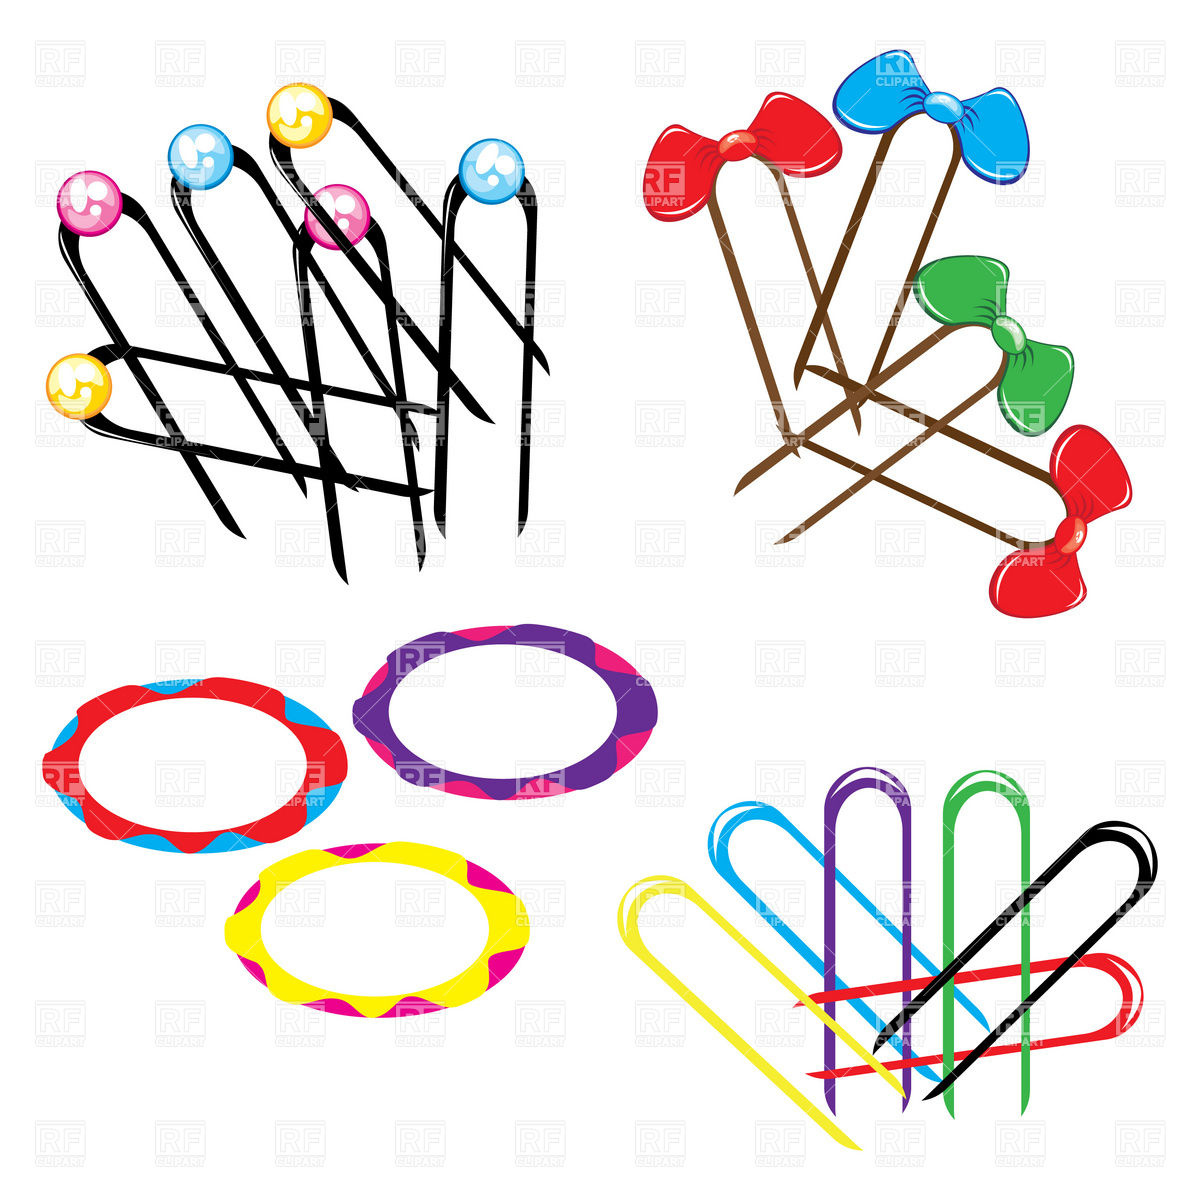 Hair Colorful Accessories   Clipart Panda   Free Clipart Images